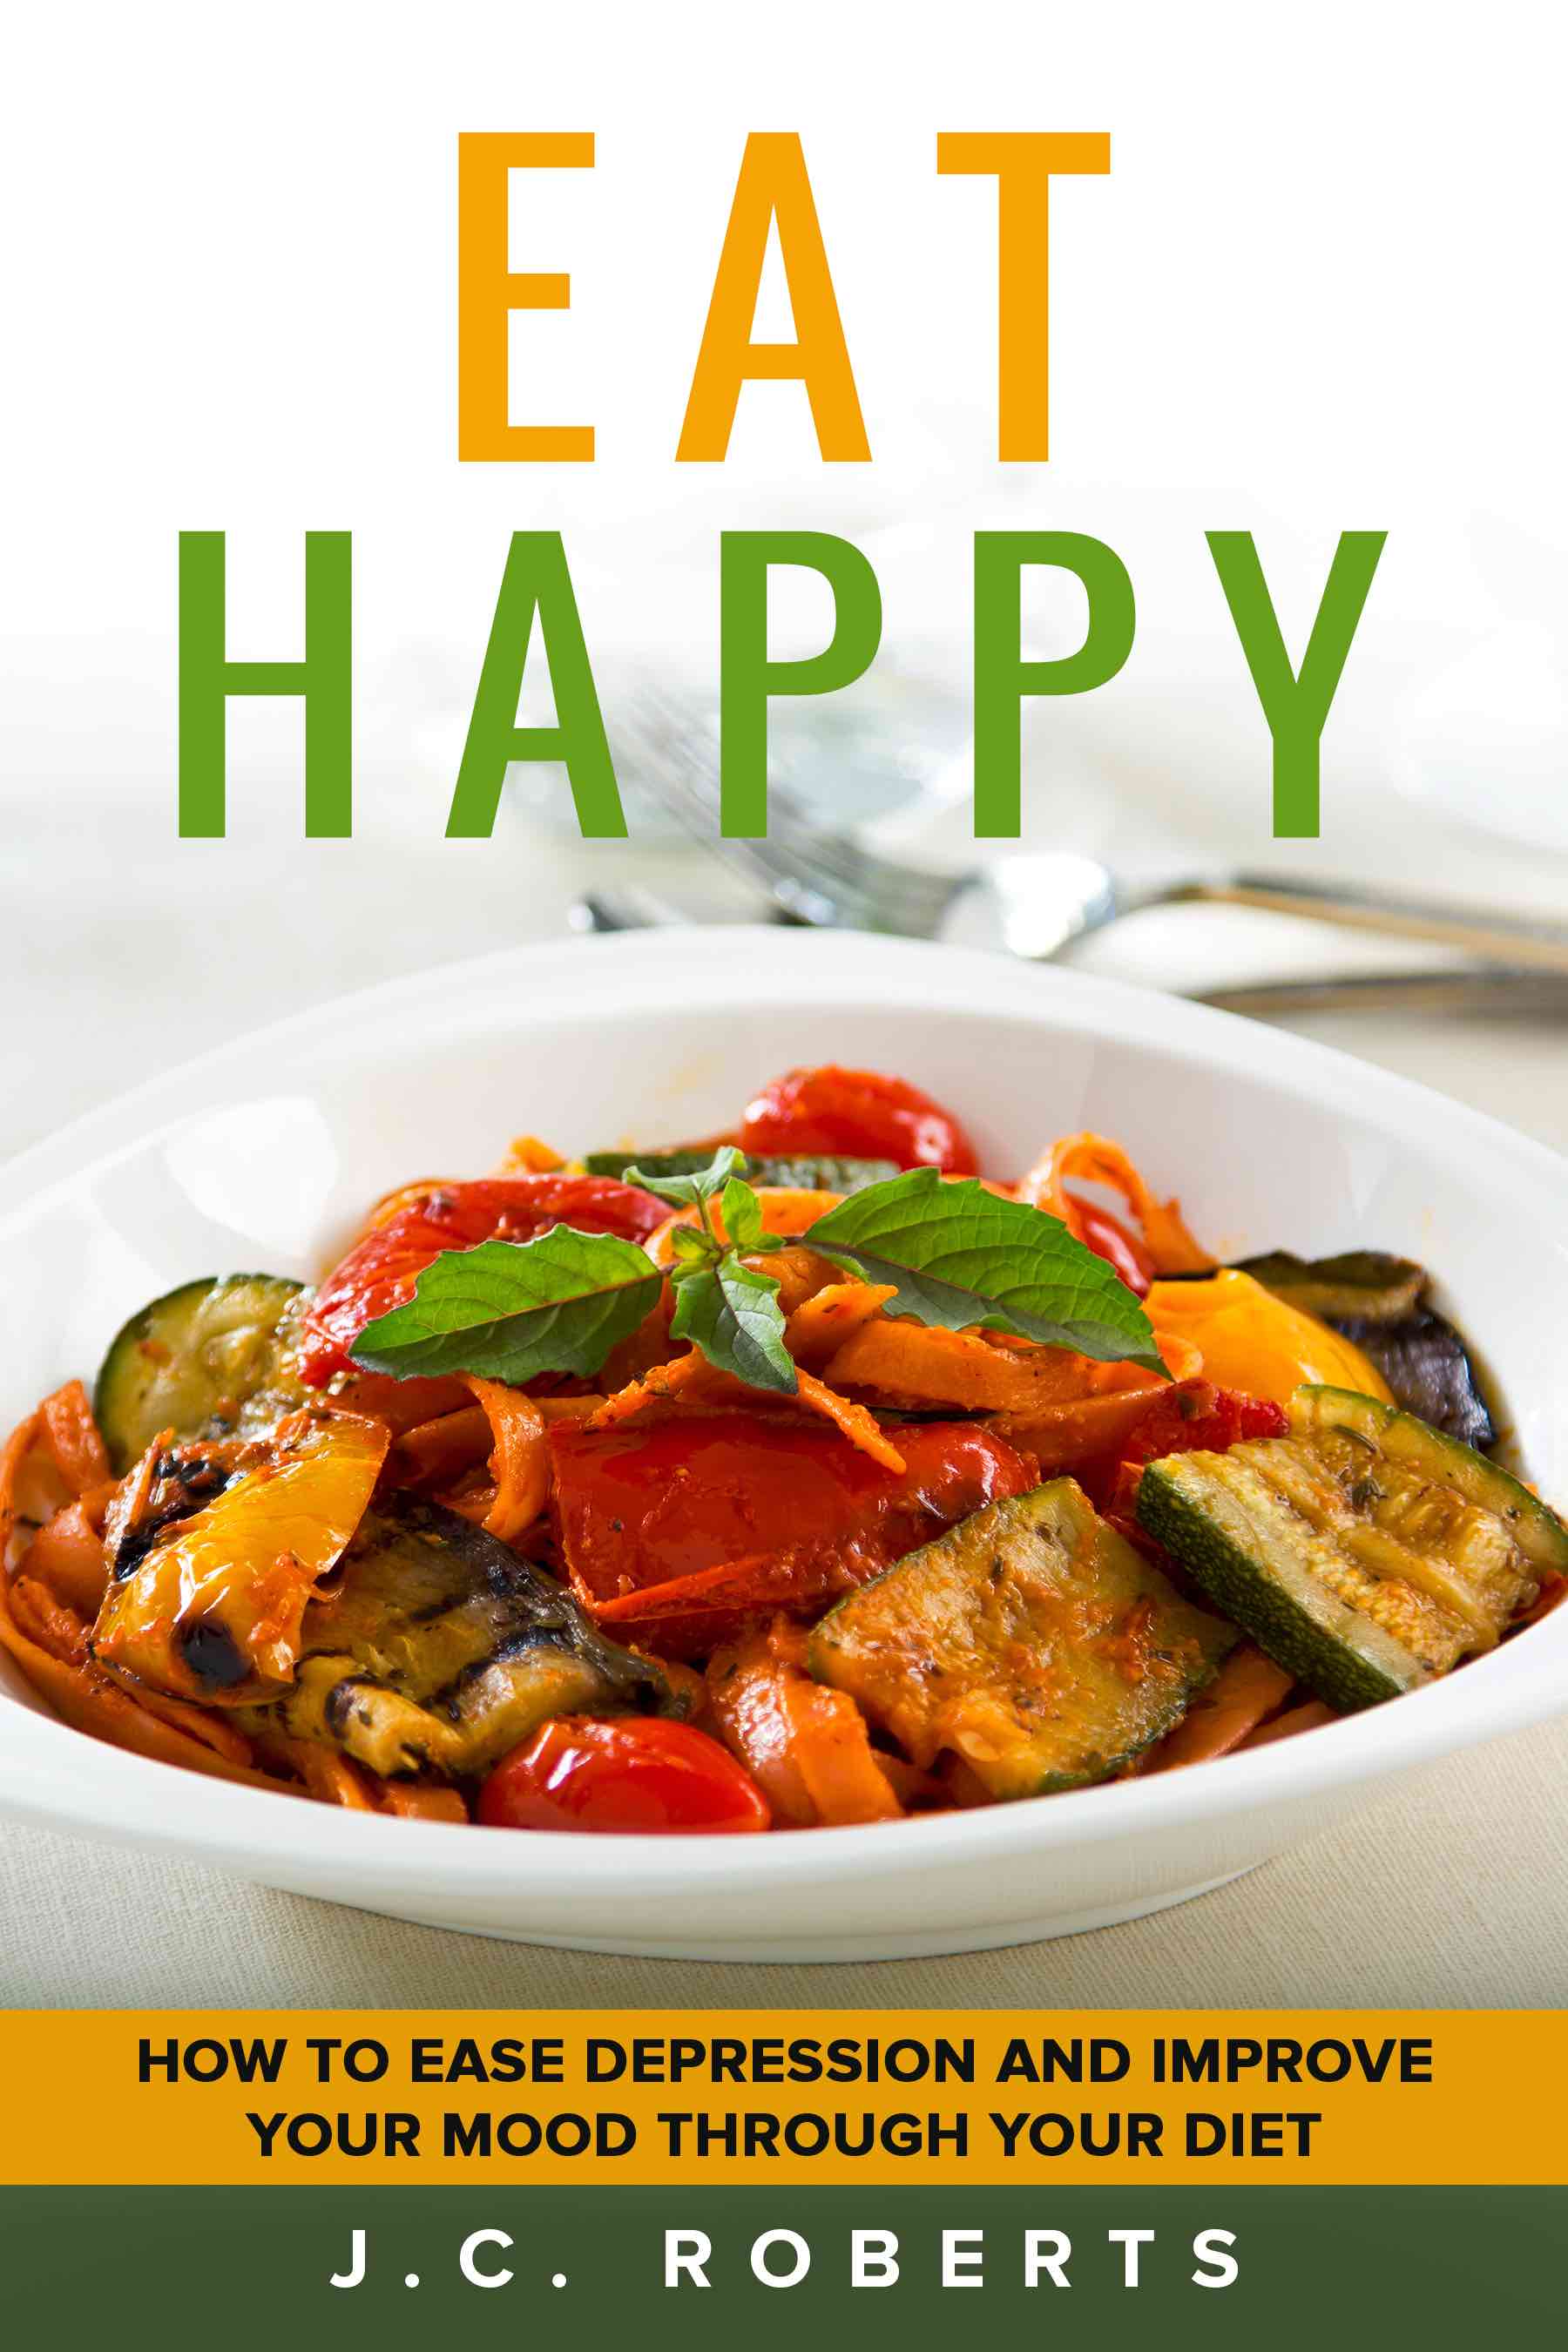 FREE: Eat Happy – How to Ease Depression and Improve Your Mood Through Diet by J.C. Roberts